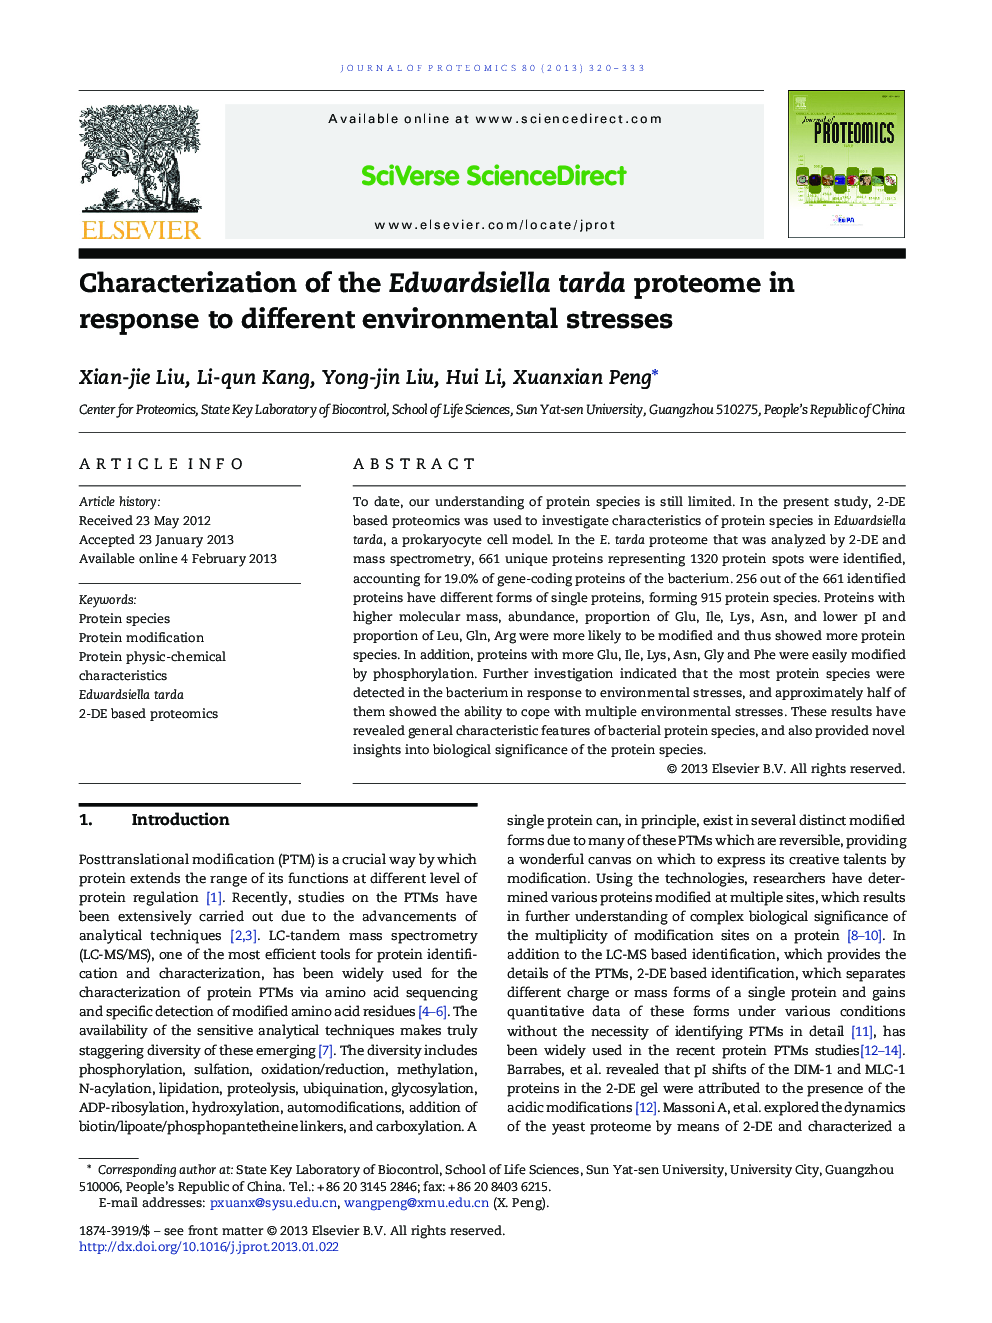 Characterization of the Edwardsiella tarda proteome in response to different environmental stresses